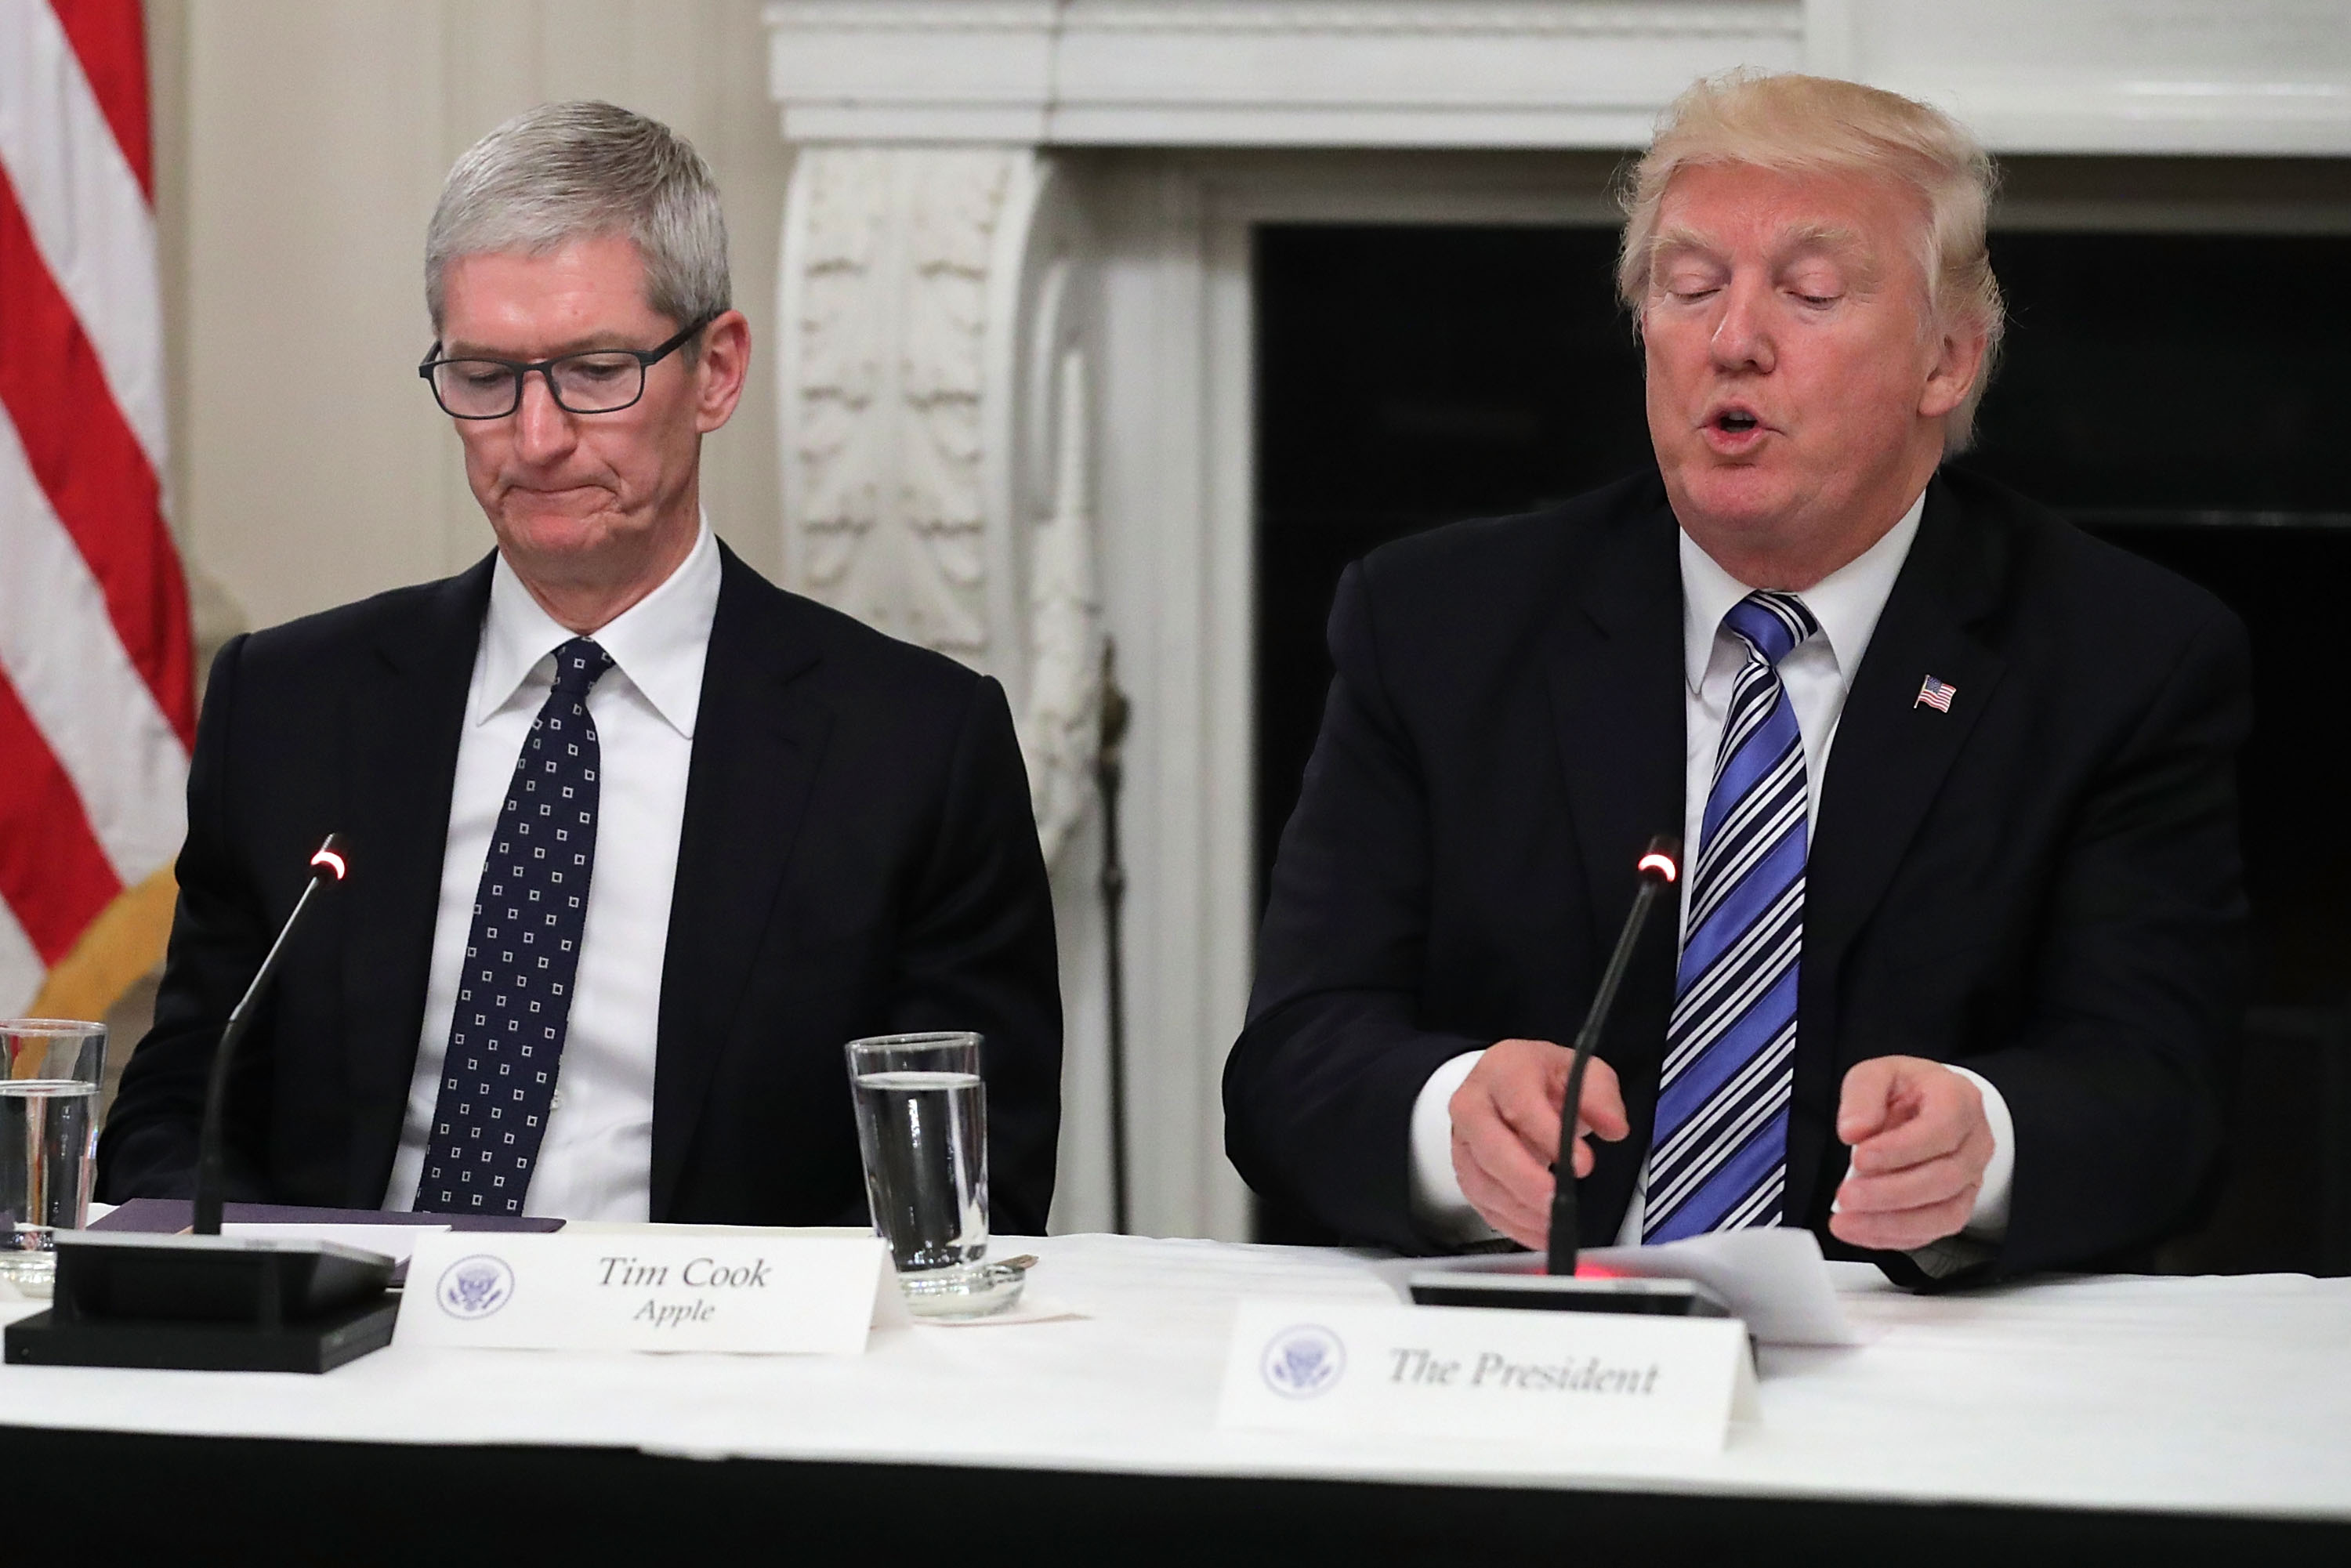 Trump Seems To Believe That Tim Cook’s Name Is ‘Tim Apple’